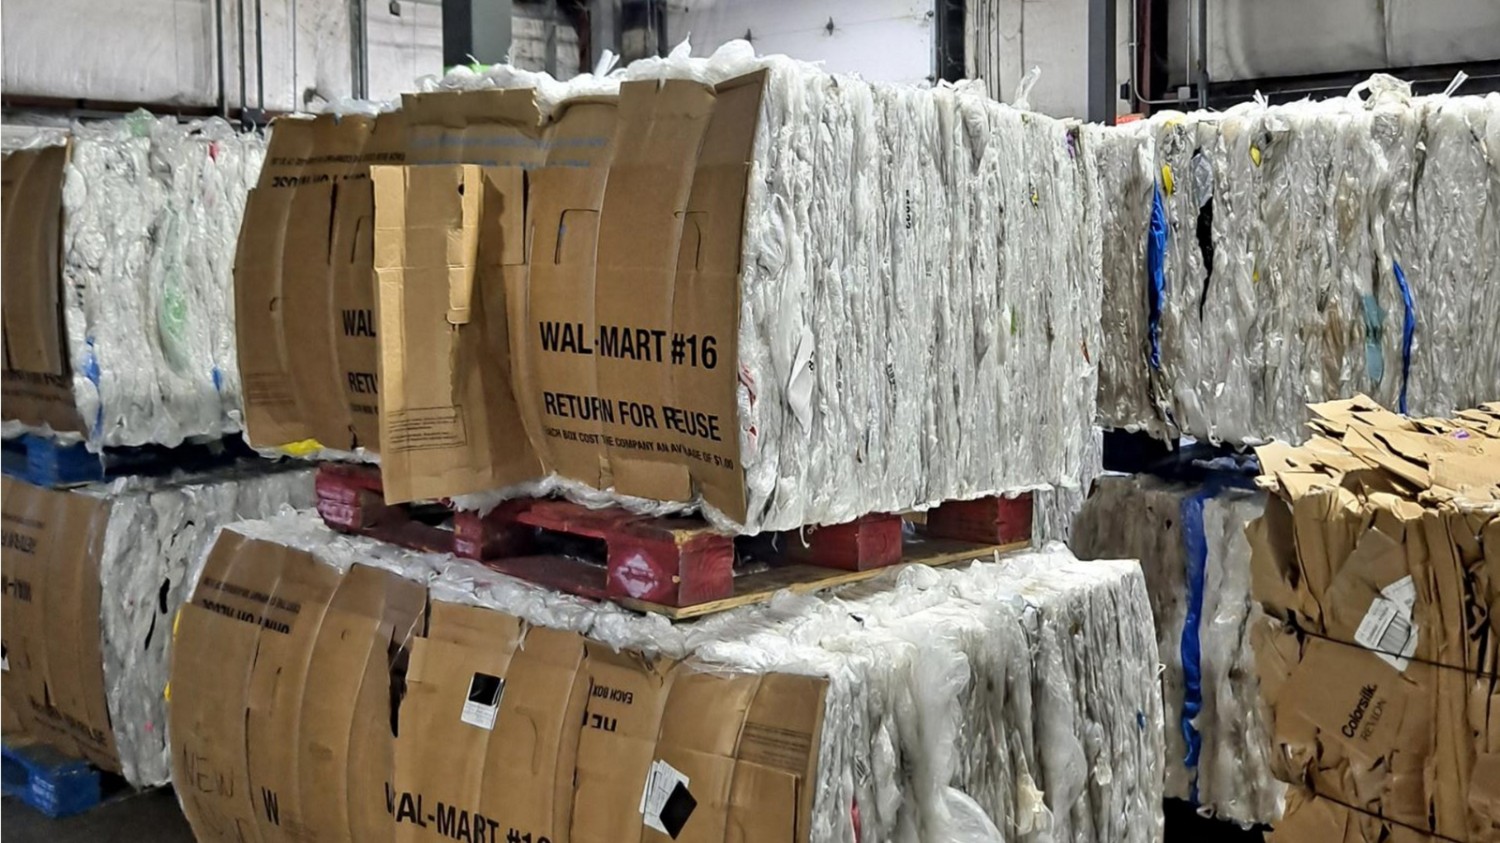 Warehouses Trash Millions Of Unsold Products, Media Reports Say